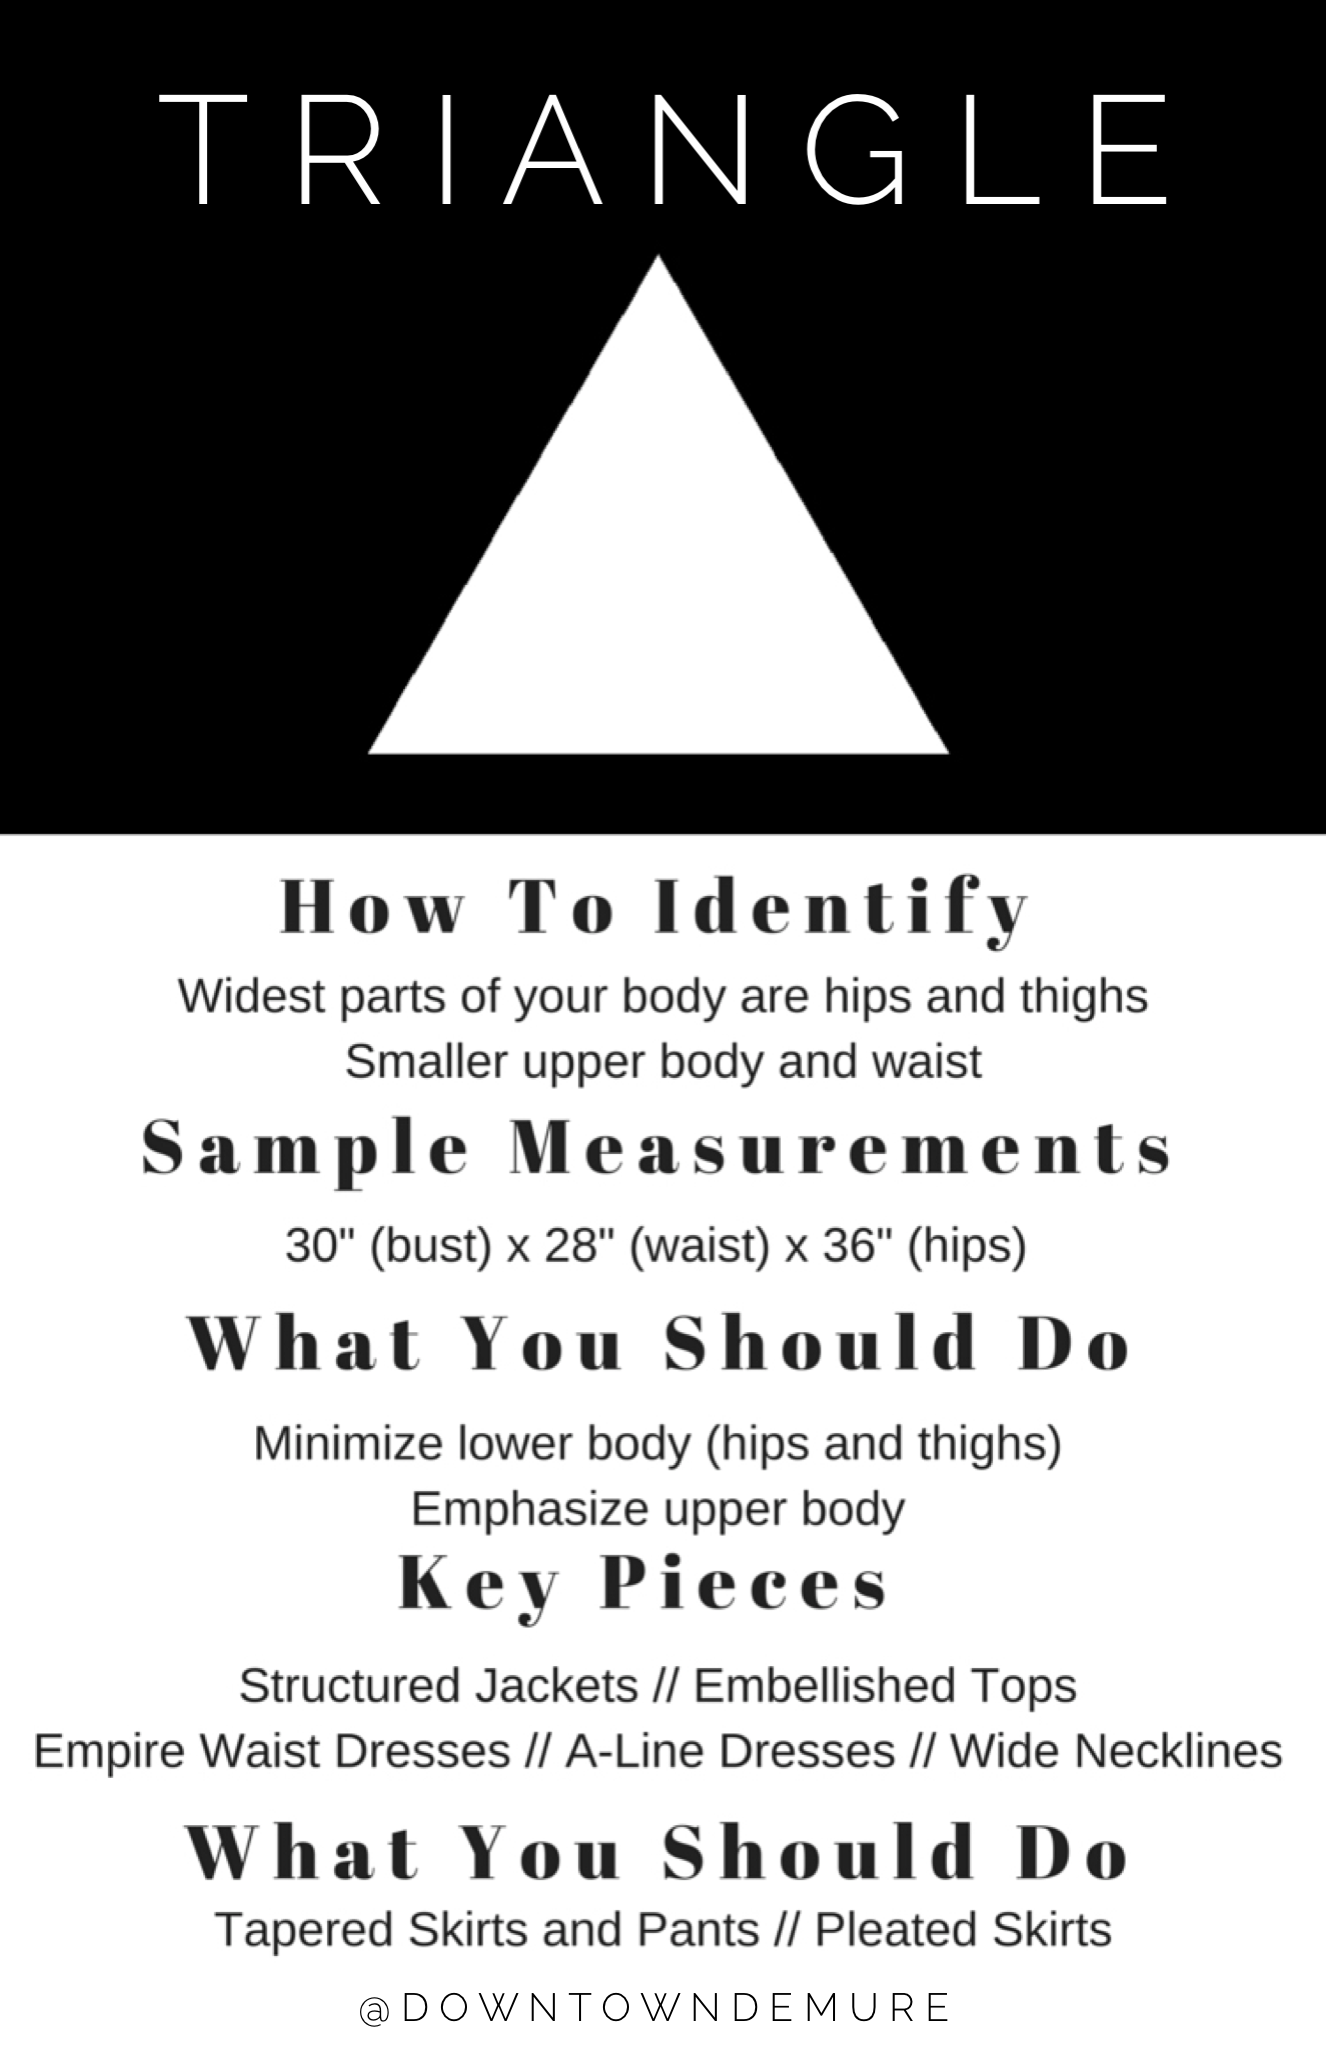 Style Tips for Women with Triangle Bodies